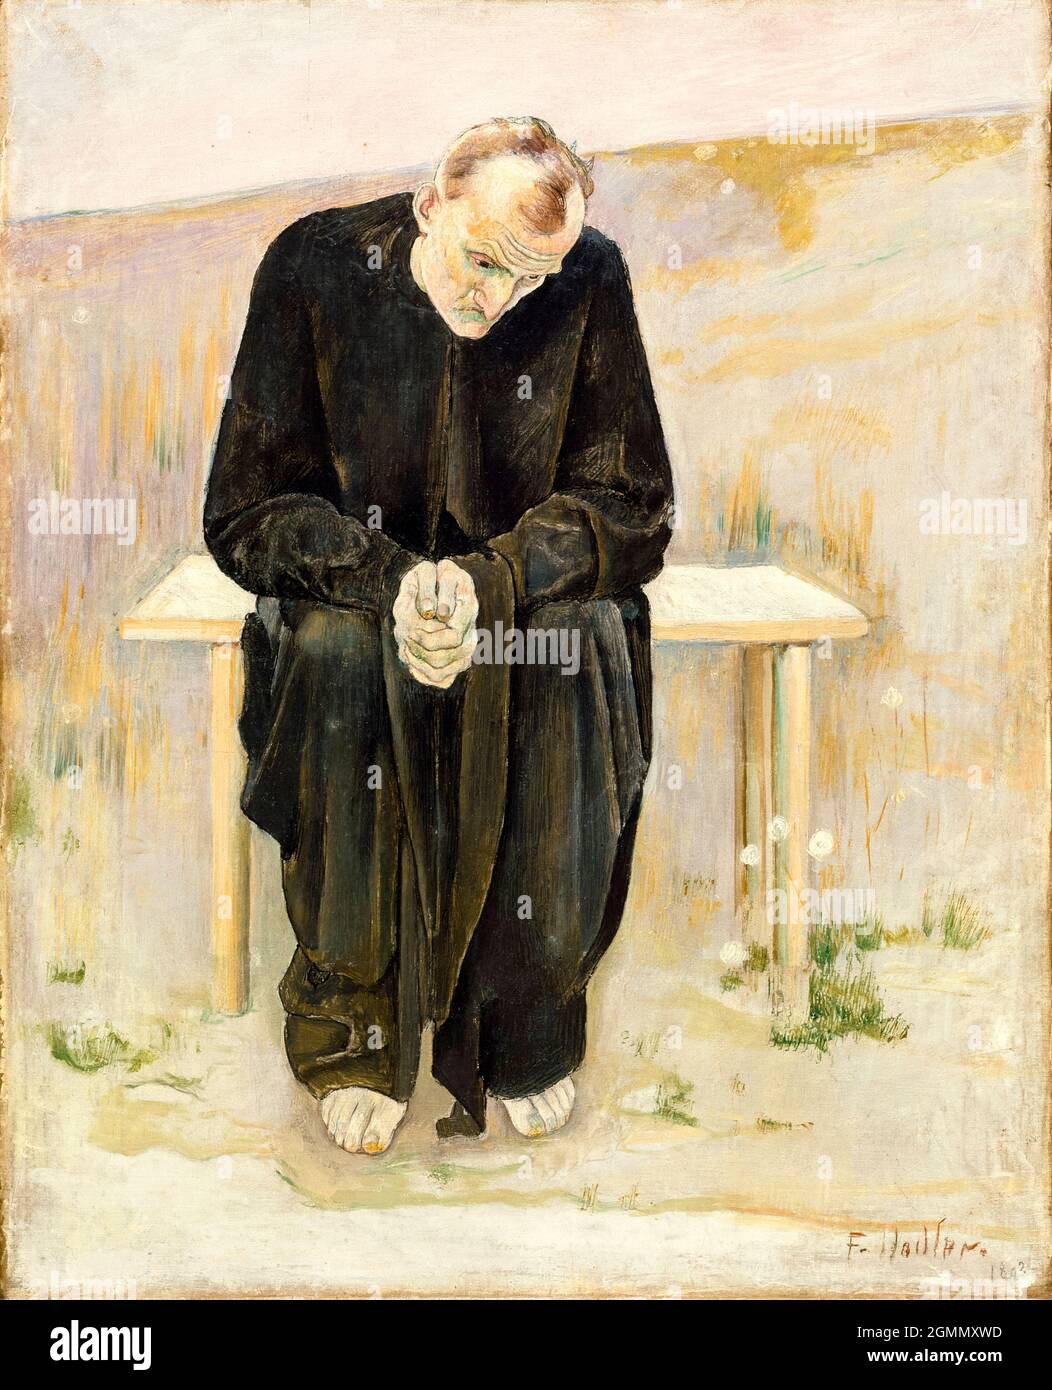 Ferdinand Hodler, The Disillusioned One, painting, 1892 Stock Photo